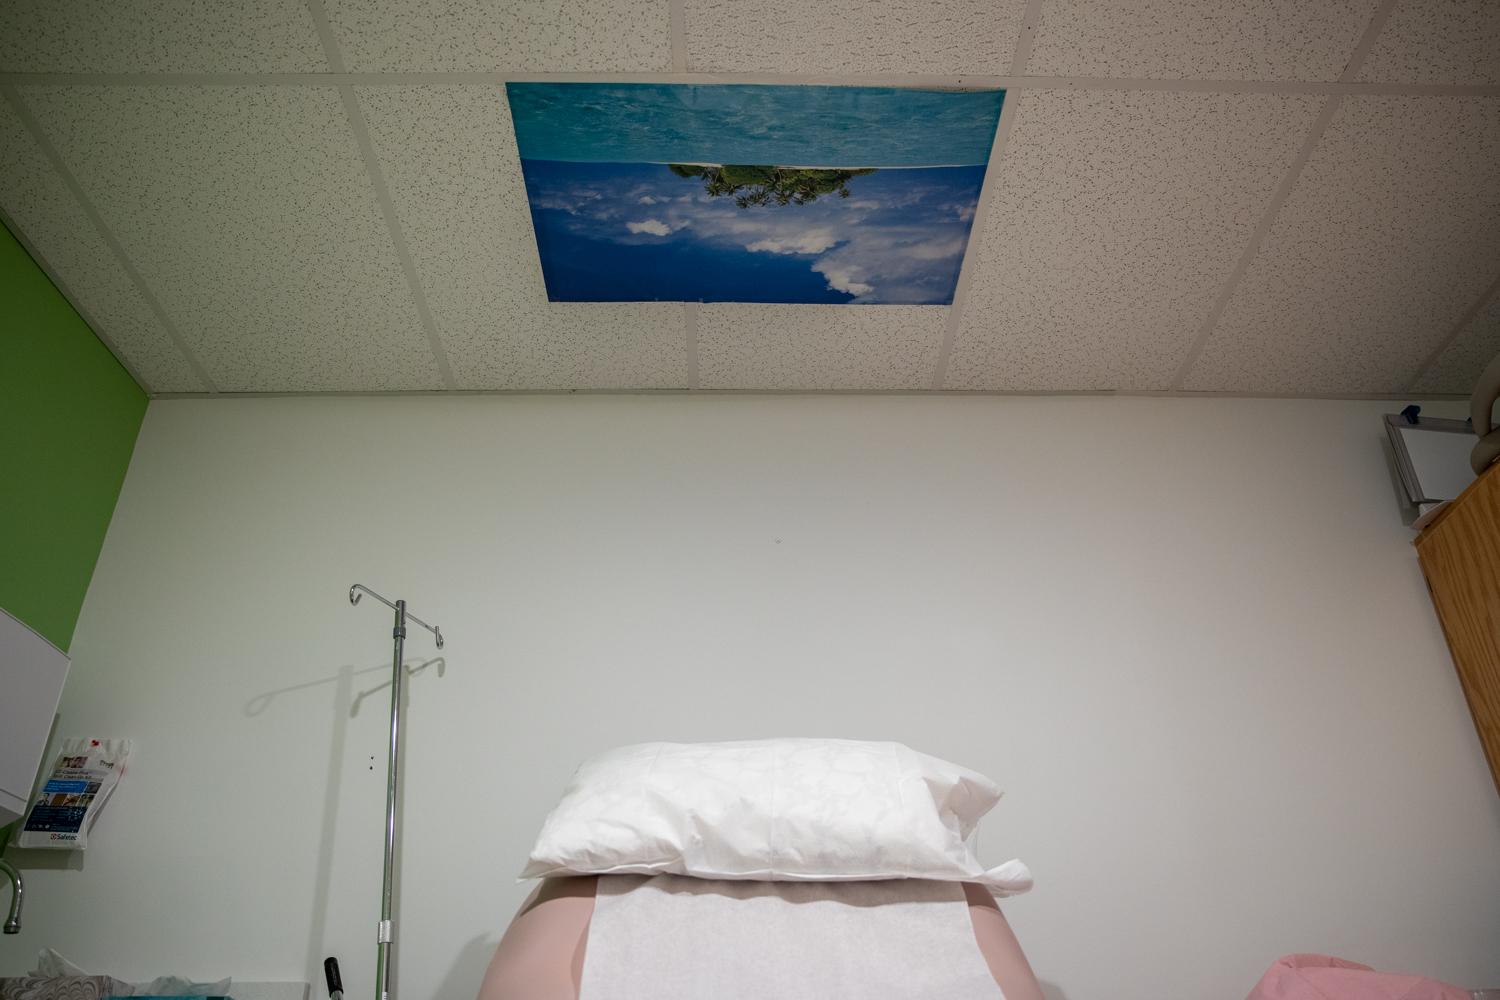 Wash Post - Women's Health - BANGOR, ME - SEPTEMBER 7TH: Room ready for abortion...